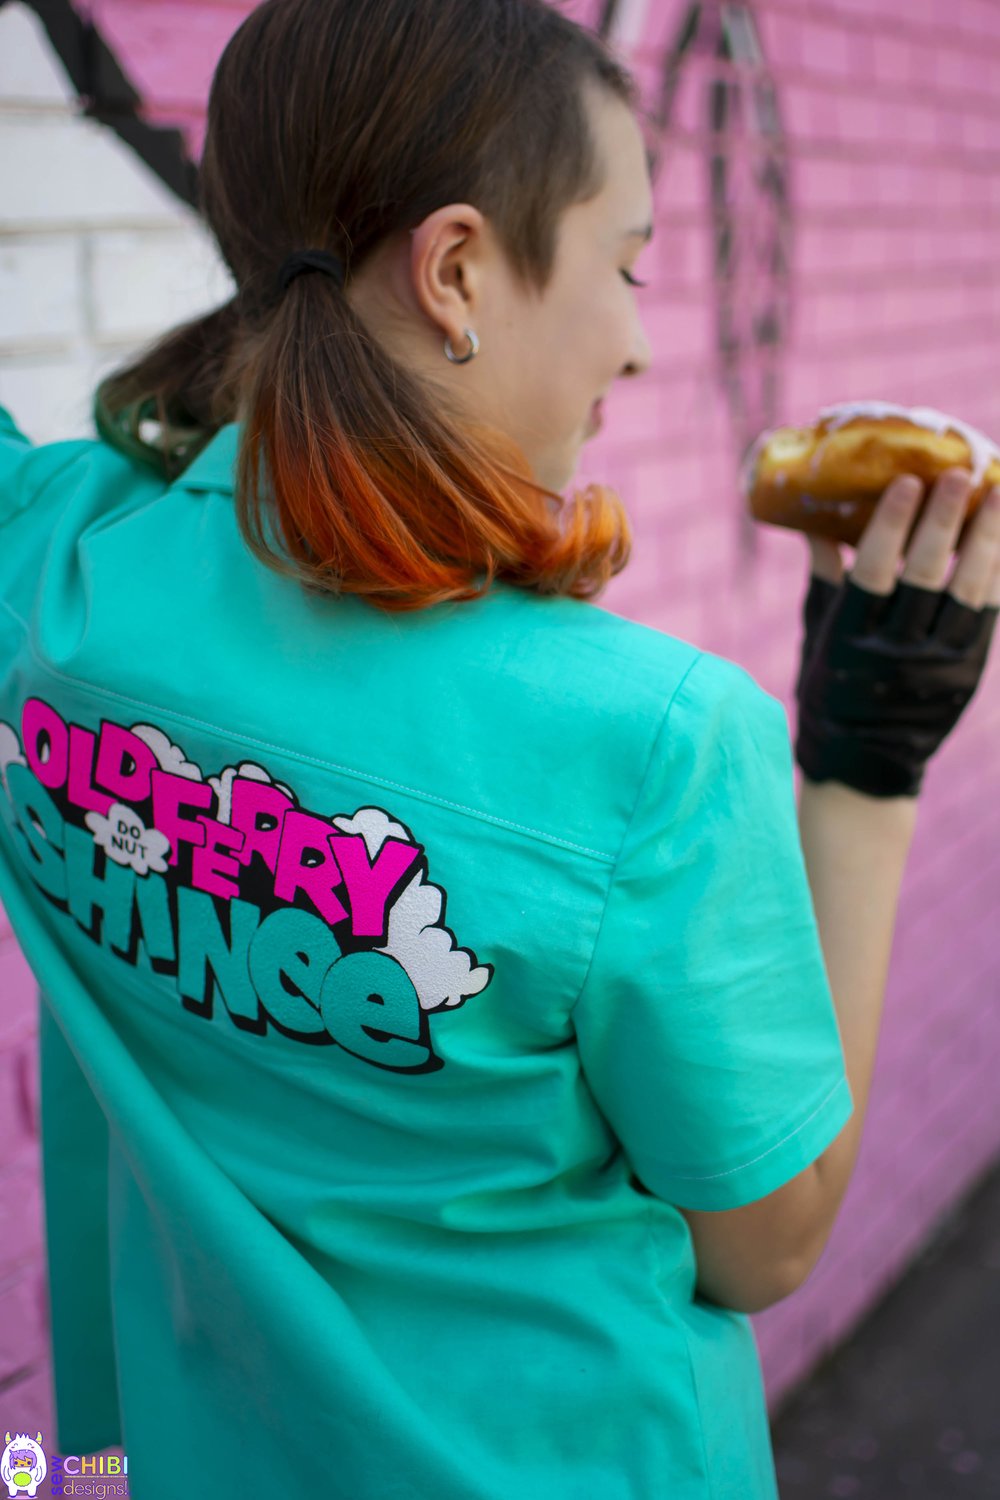 SHINee KEY for Old Ferry Donut inspired shirt made by Sew Chibi Designs 2023